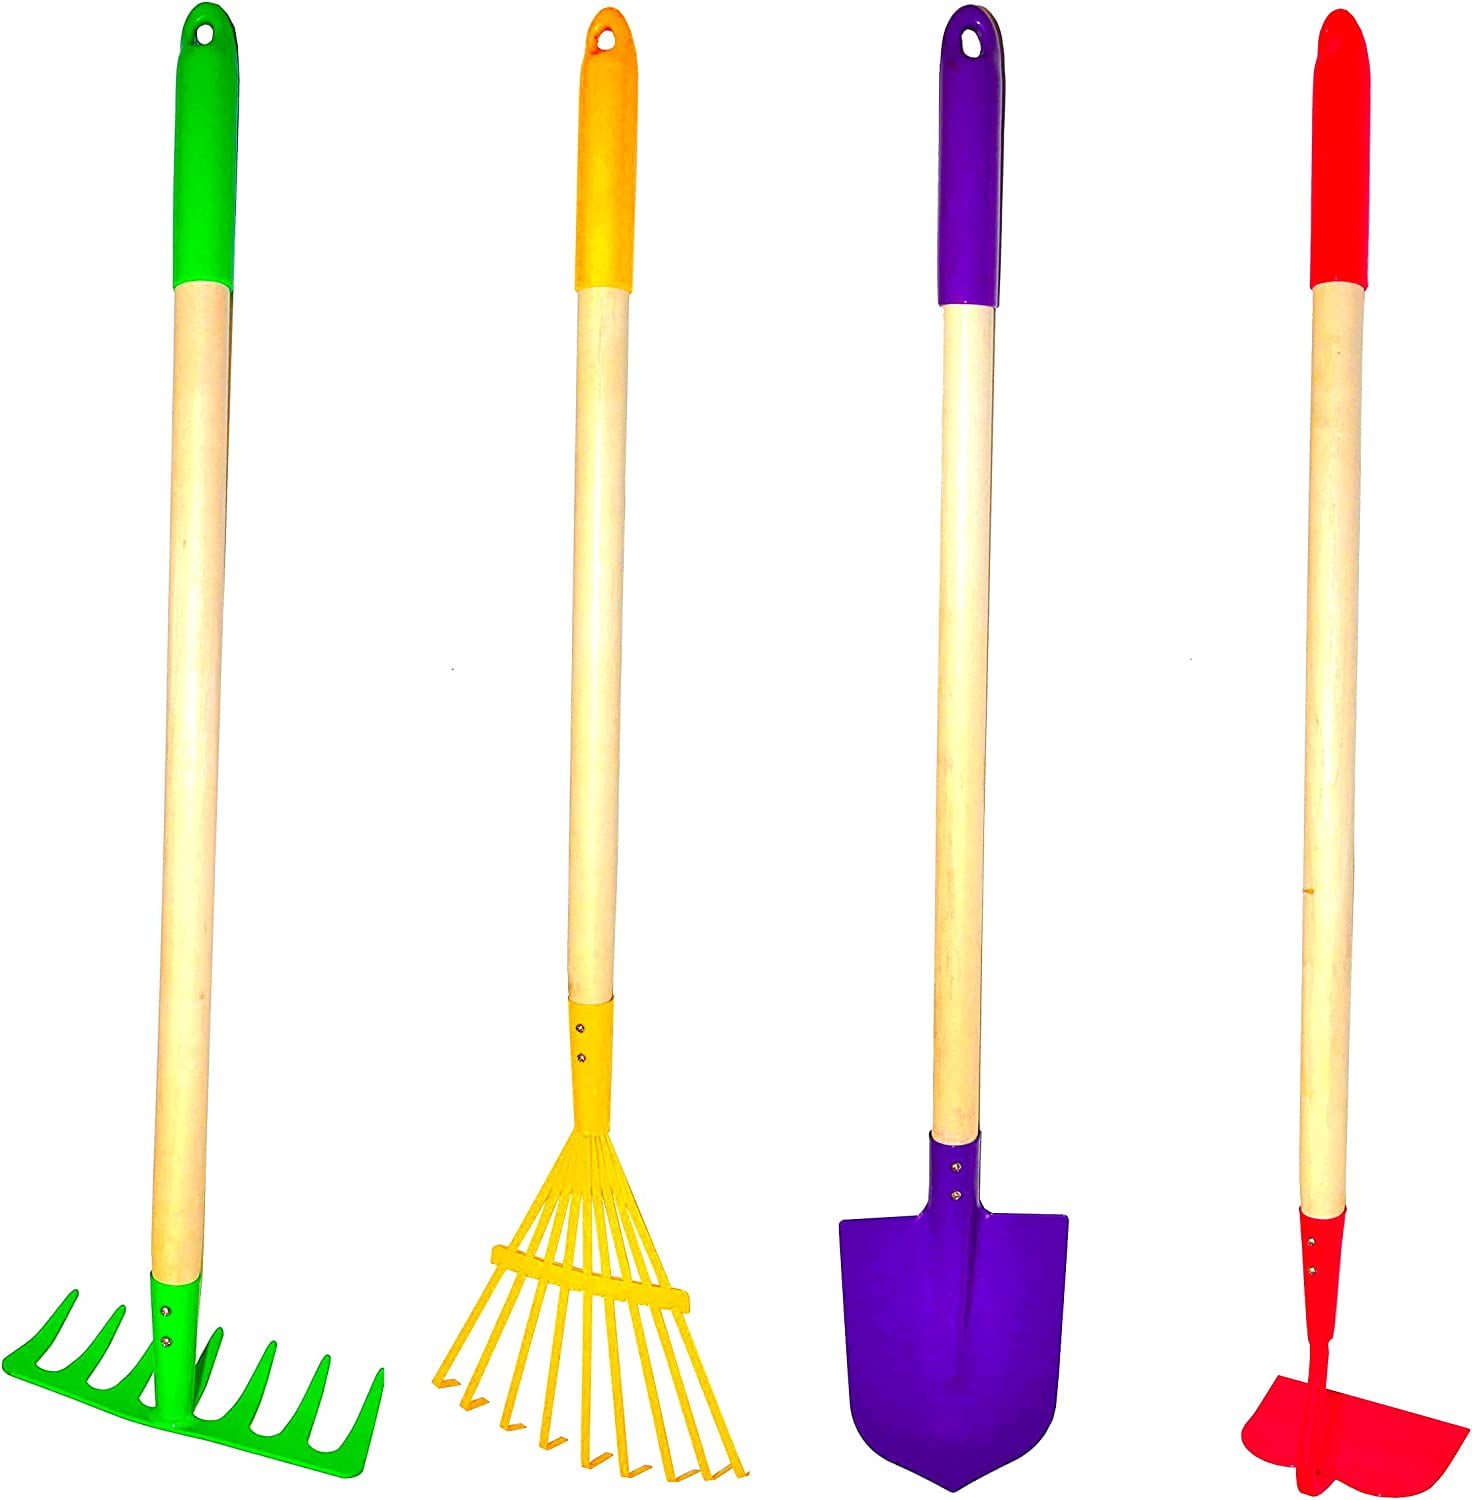 3pcs Kids Gardening Tools Kit Garden Toys Plastic Safe Gardening Tools Trowel Rake Shovel Gifts Role Play Accessories Outdoor And Learning Toys DirkFigge Baby Shovel Set 